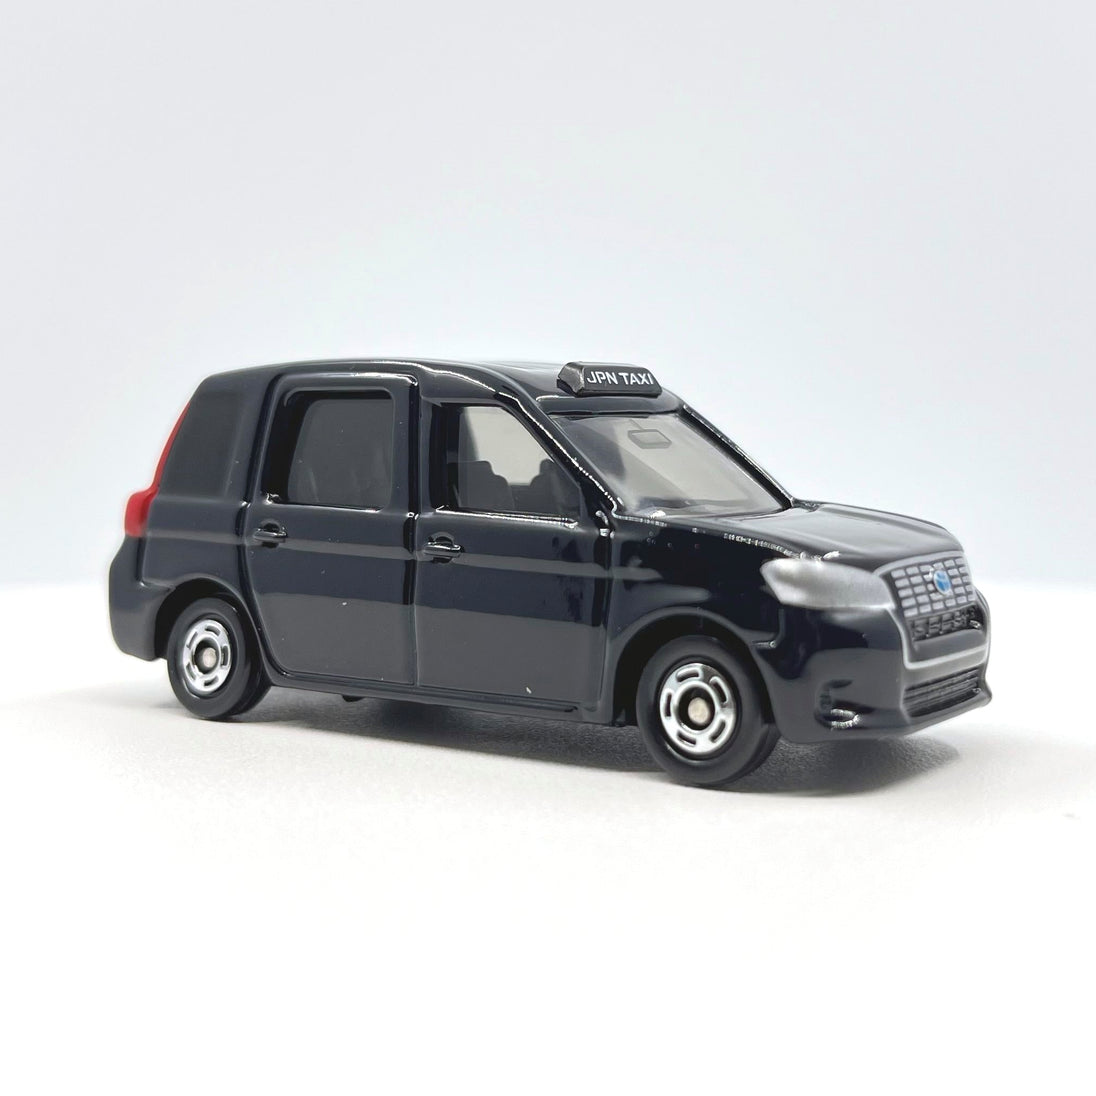 1:62 Toyota Japan Taxi Alloy Tomica Diecast Car Model by Takara Tomy